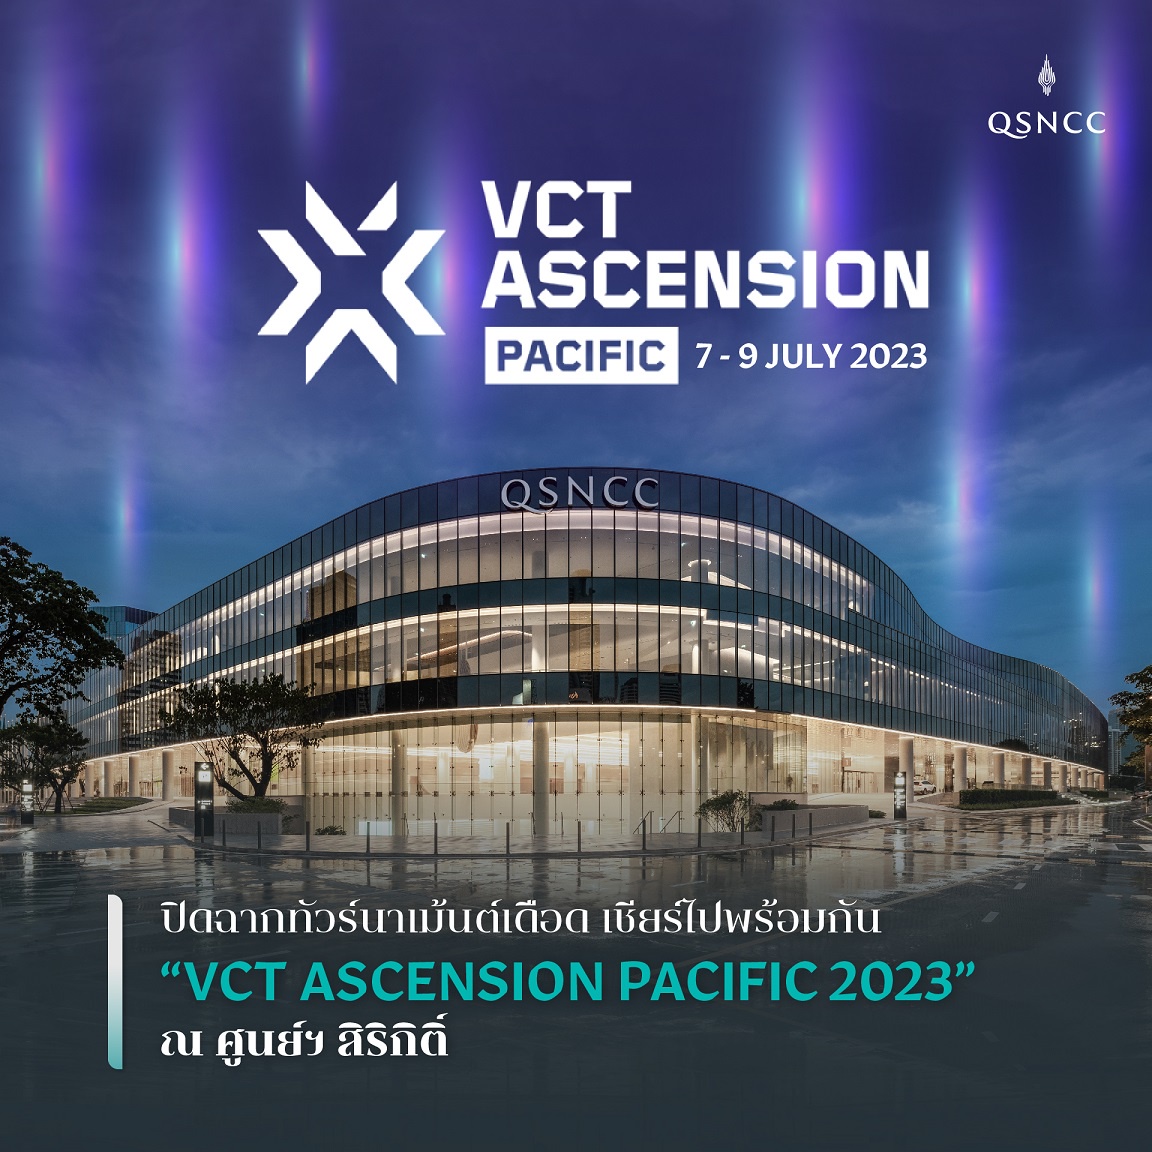 Cheer for your favorite team during the final round of VCT Ascension Pacific 2023 at Queen Sirikit National Convention